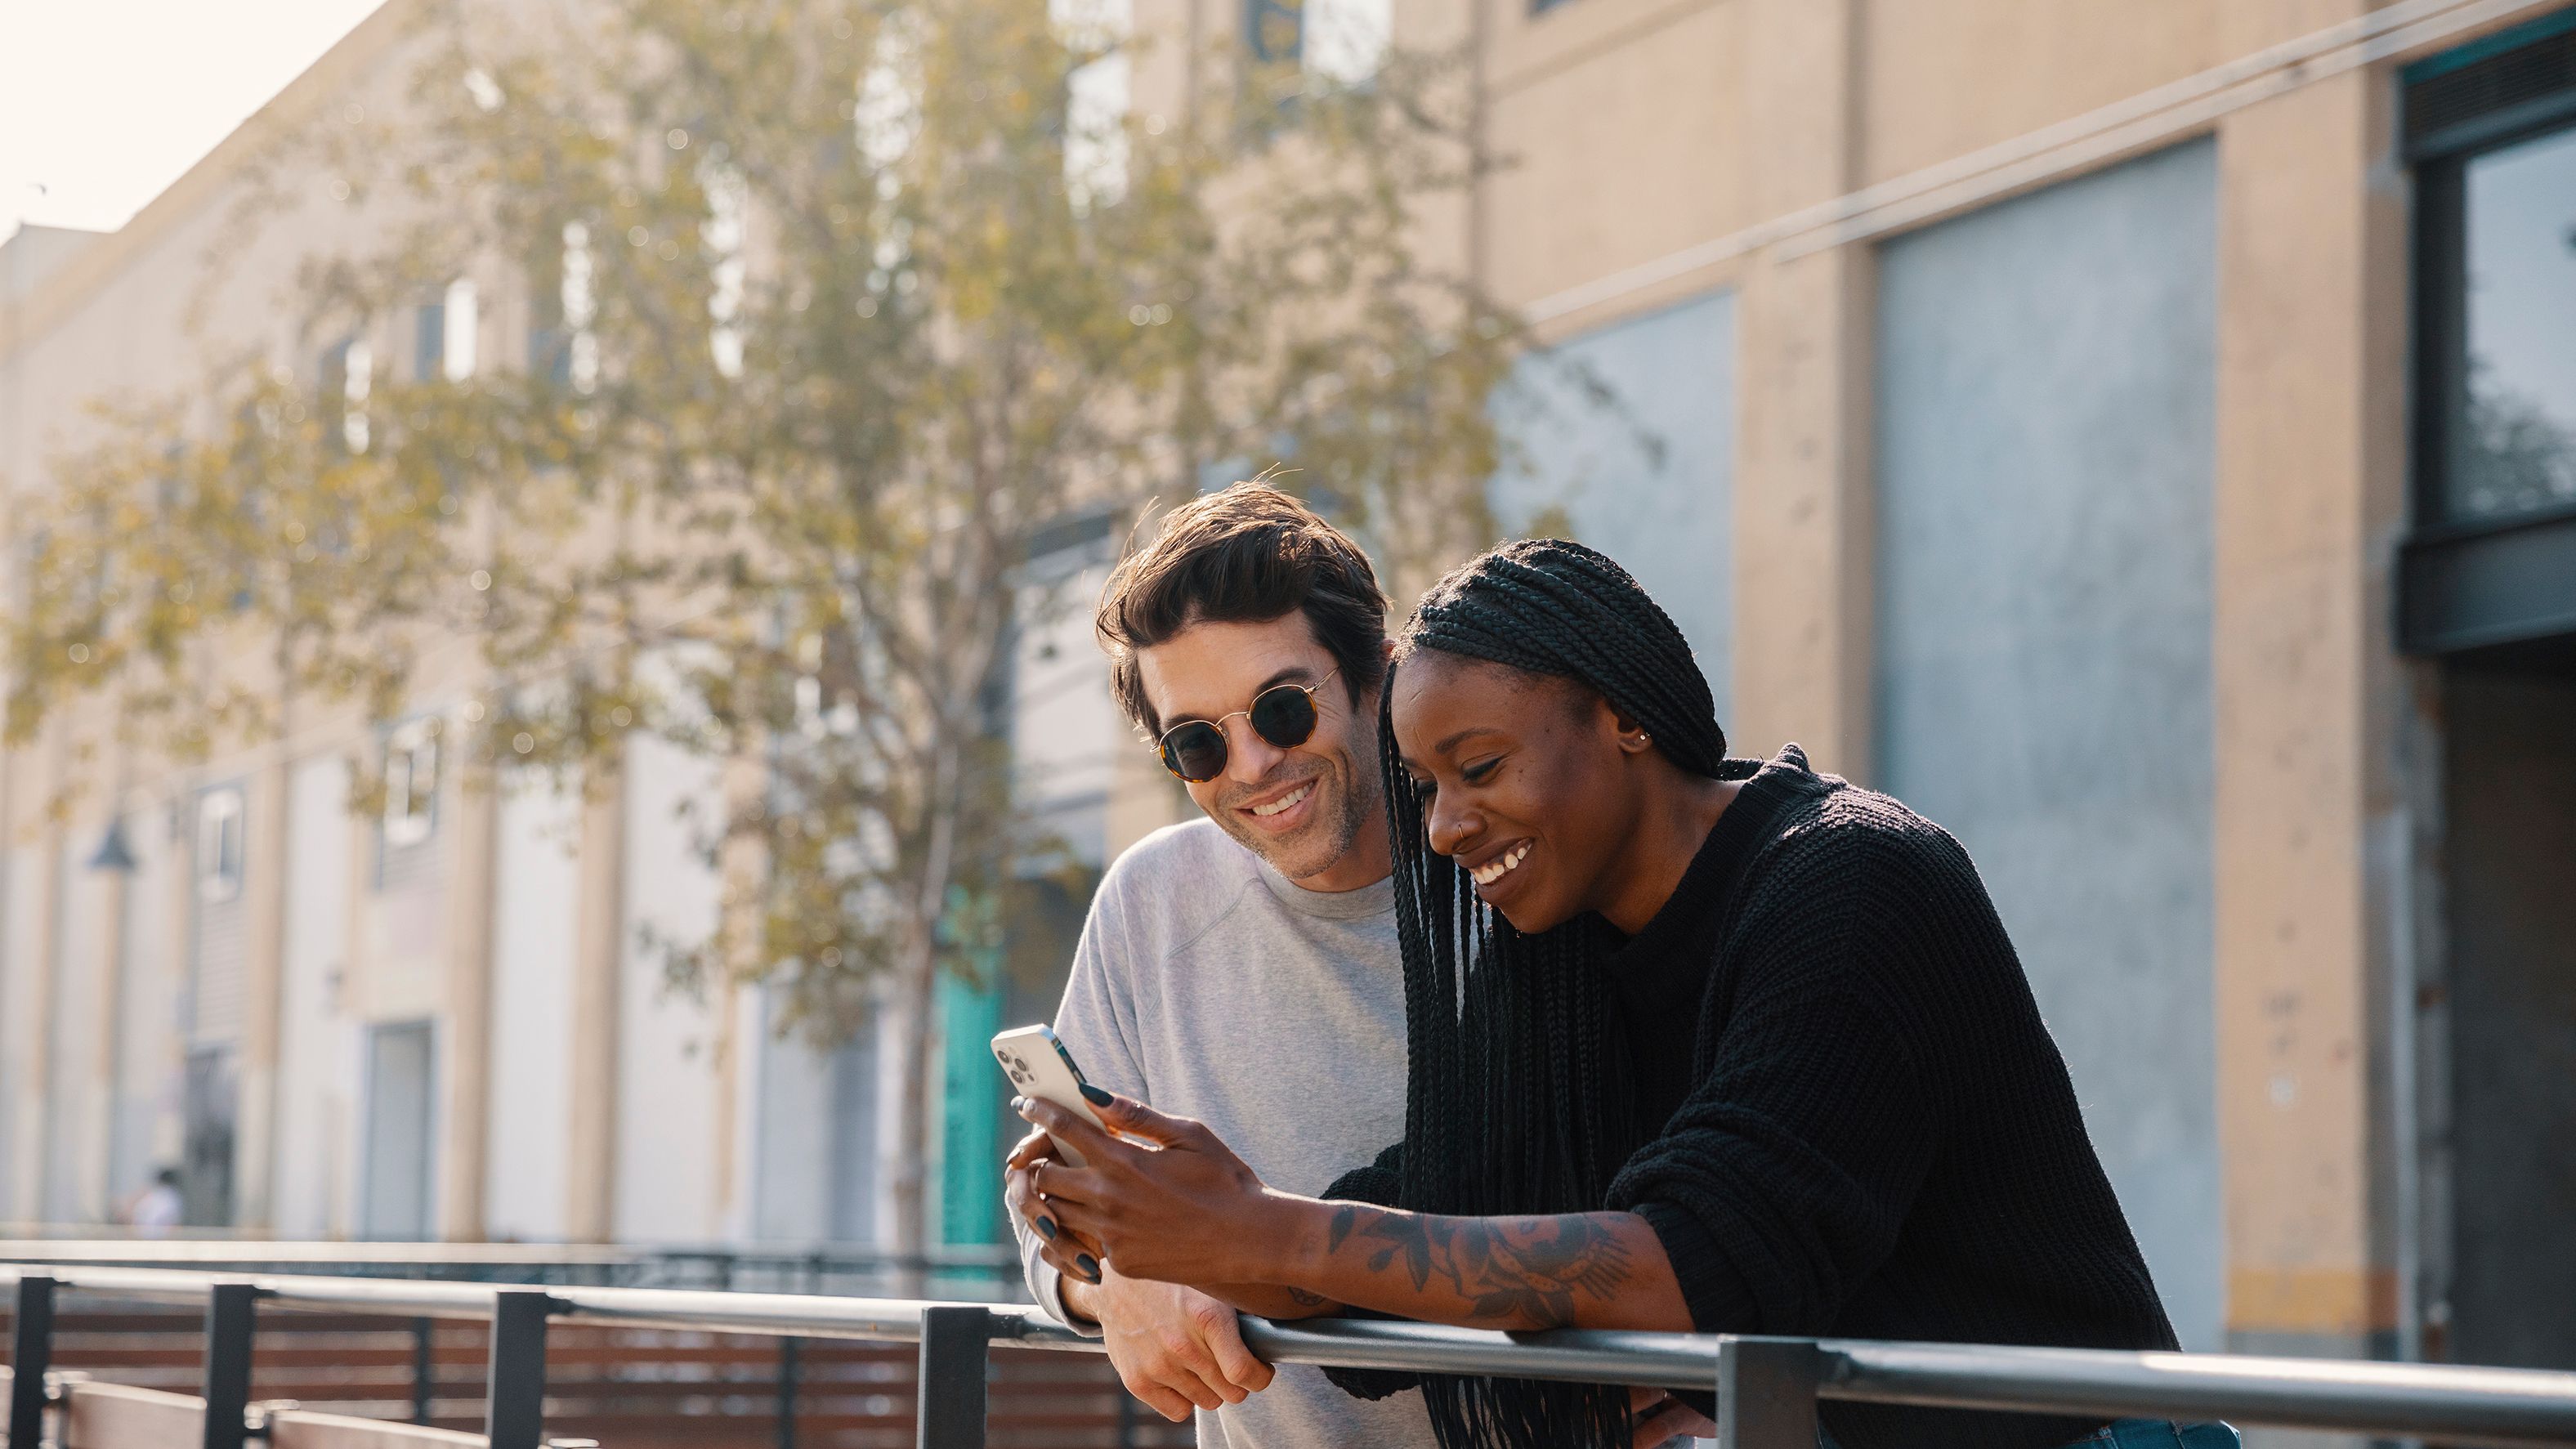 Two people in a city smile looking at a mobile device.